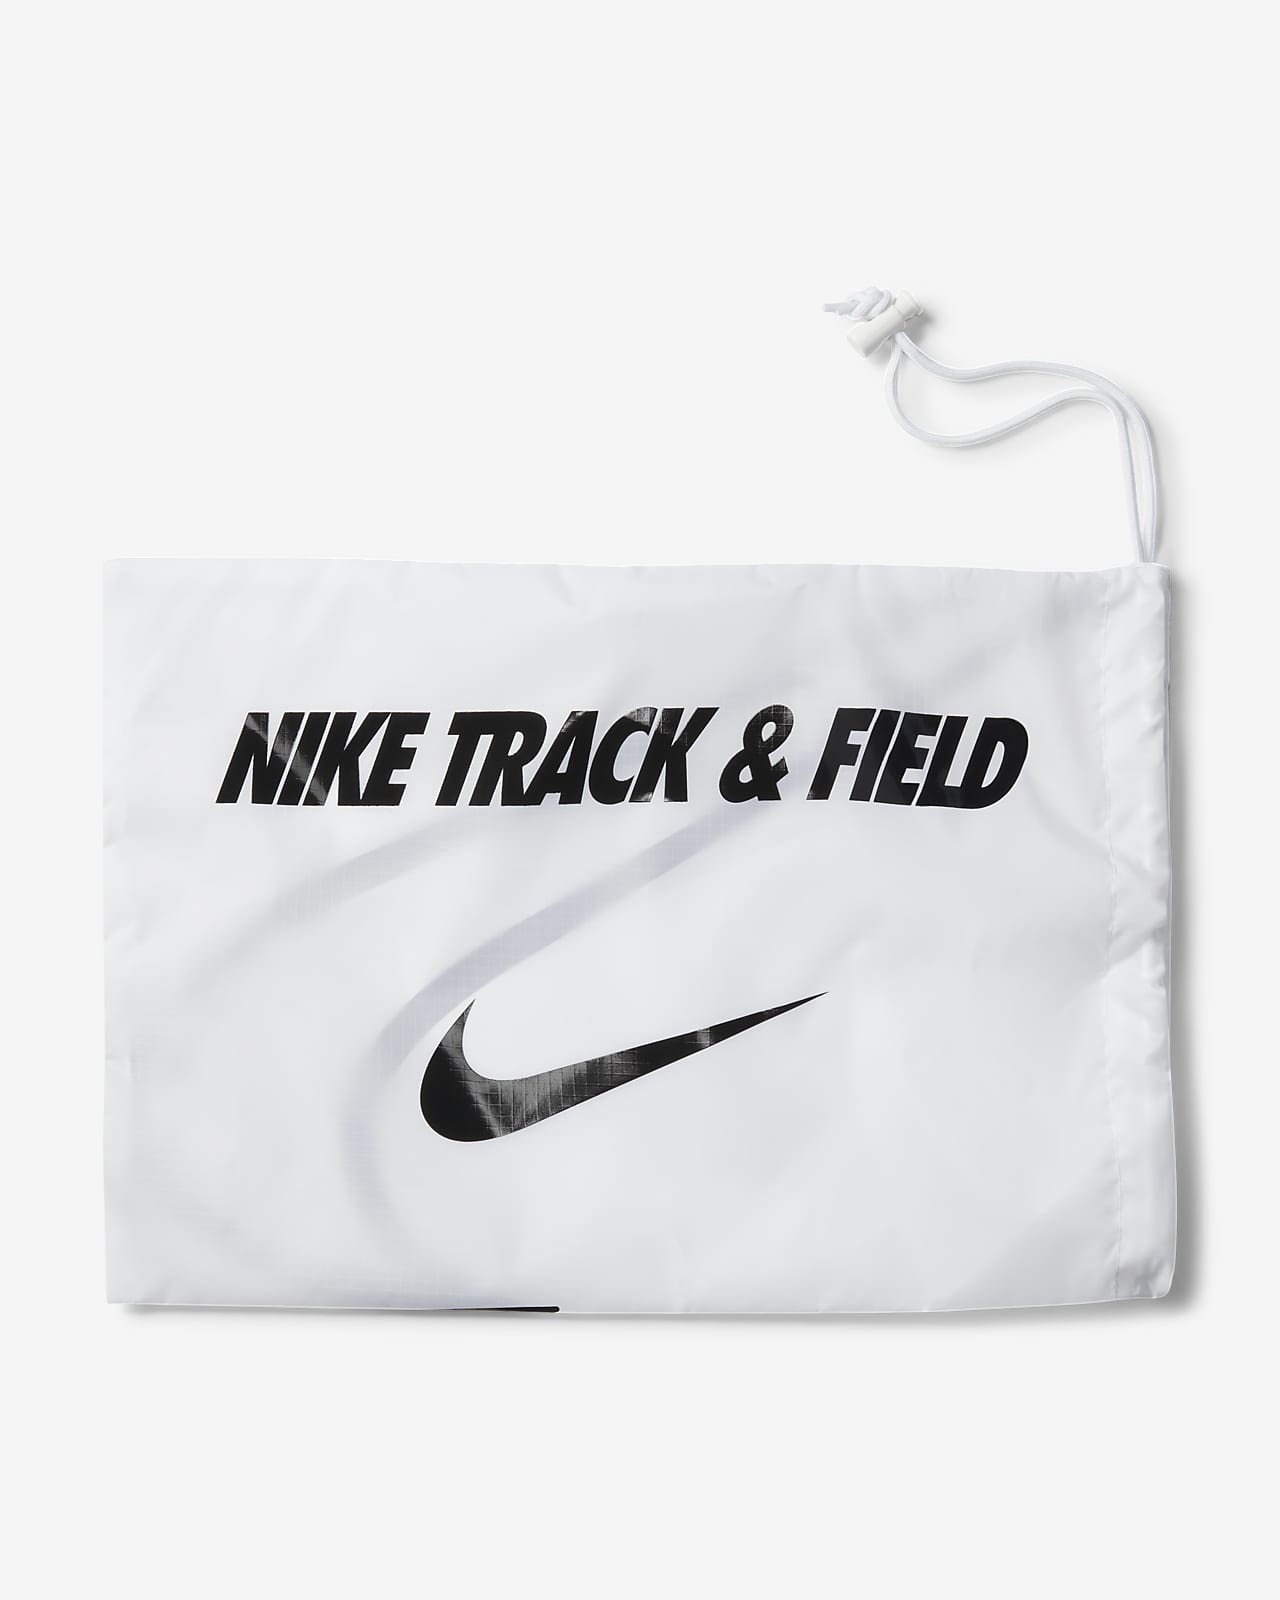 færdig Tyr i morgen Nike Ja Fly 4 Track and Field Sprinting Spikes. Nike.com